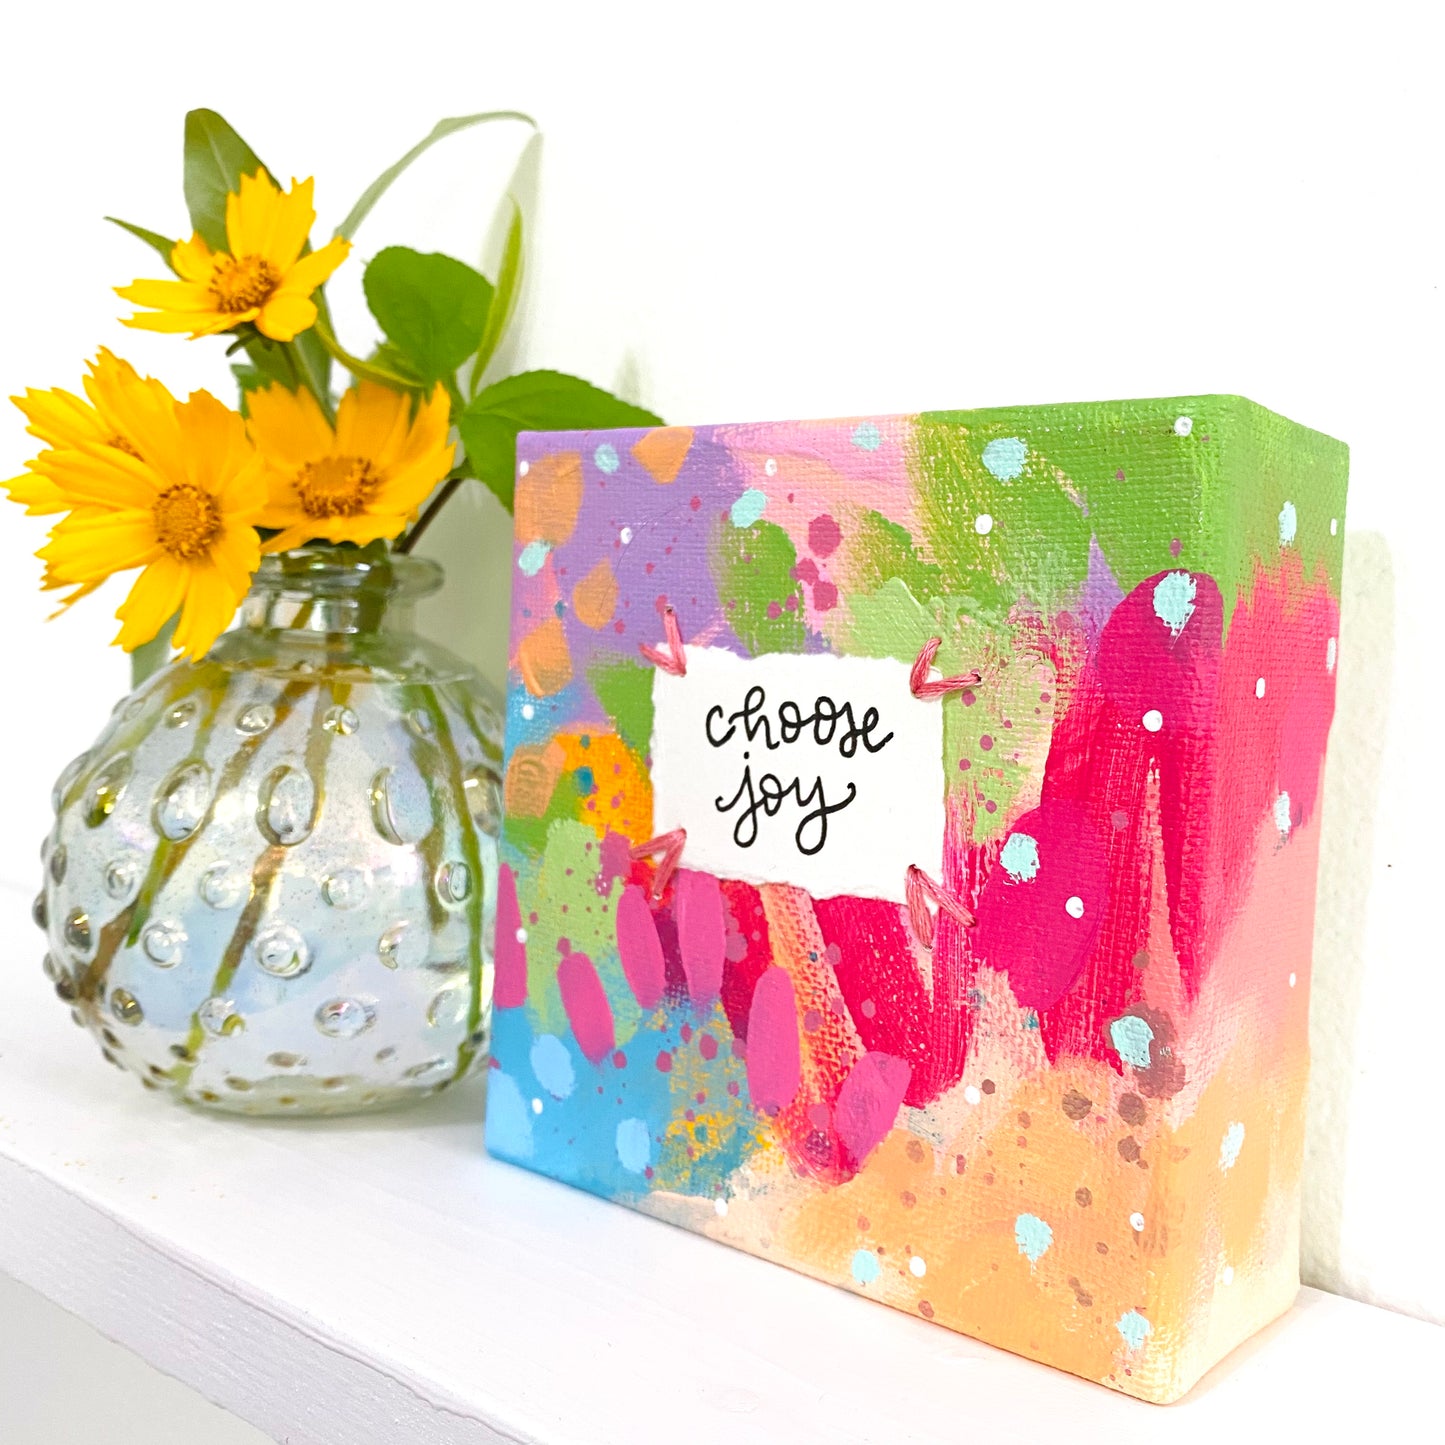 Choose Joy 4x4 inch original abstract canvas with embroidery thread accents